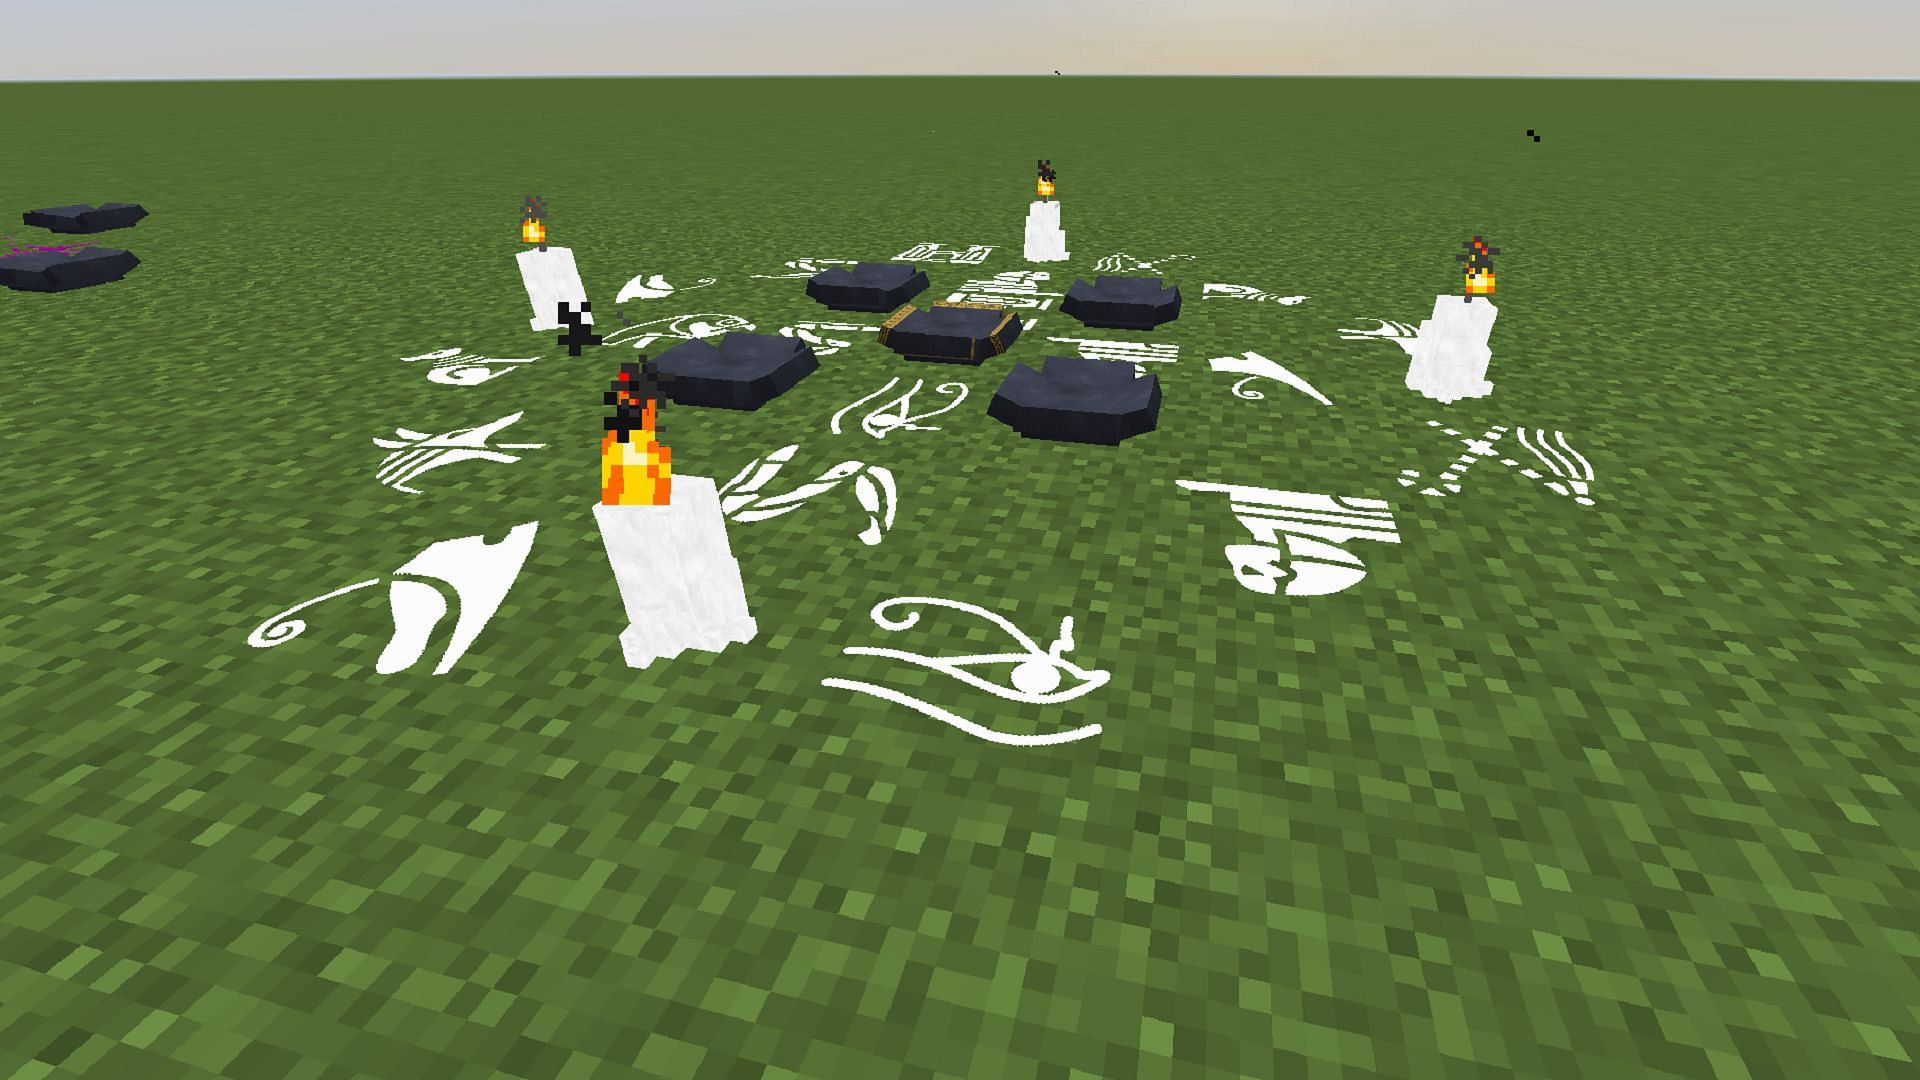 A summoning circle as seen in Minecraft